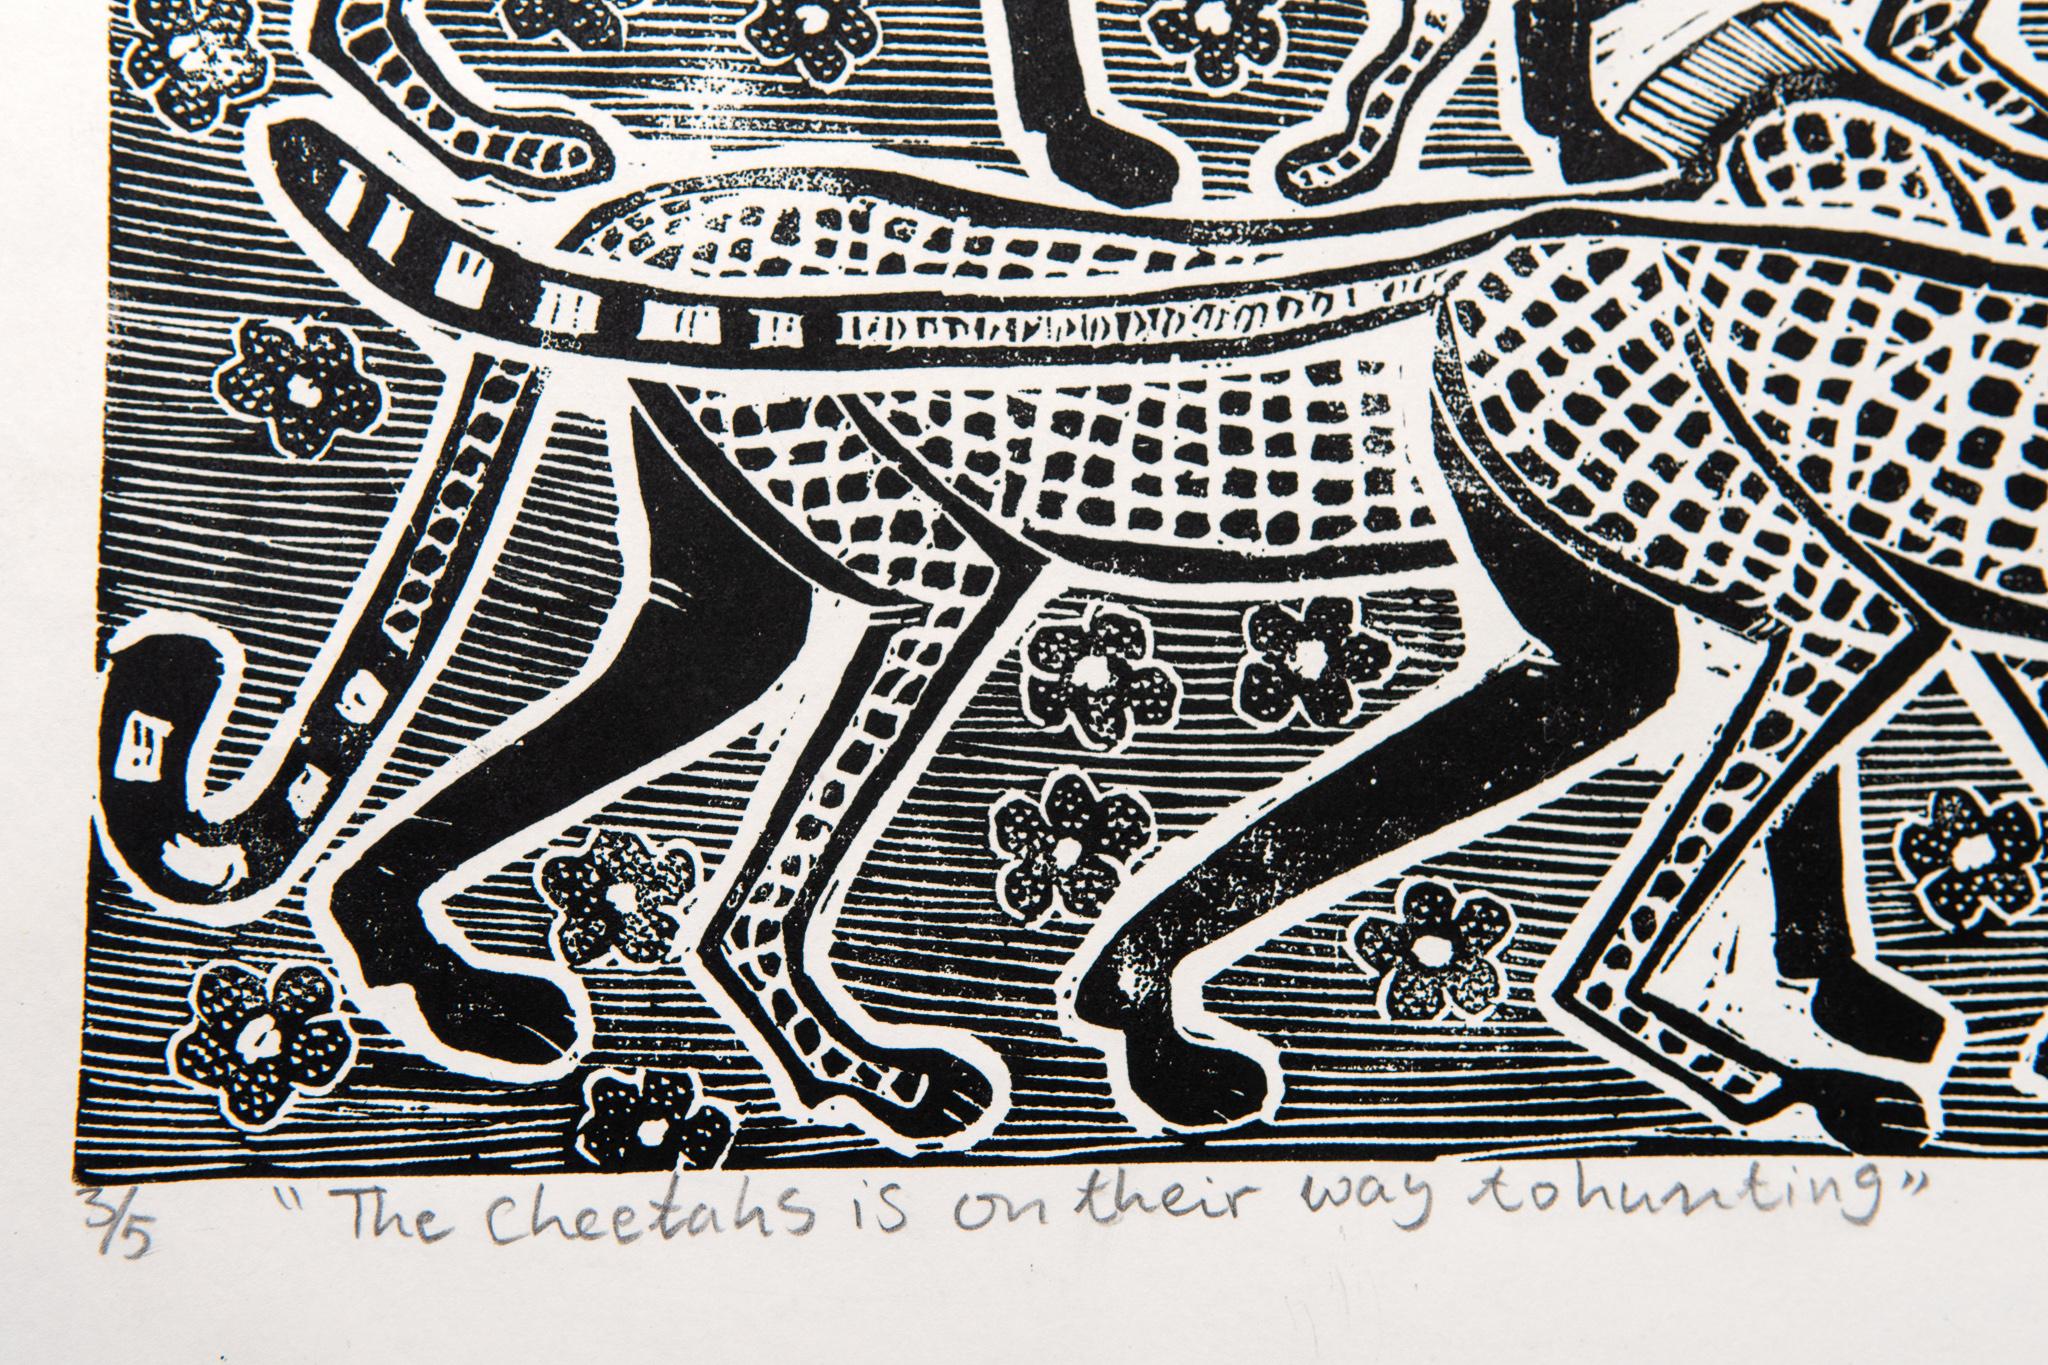 The cheetahs is on their way to hunting, 2019. Linoleum block print on paper. Edition of 5.

Elia Shiwoohamba was born in 1981 in Windhoek, Namibia. He graduated from the John Muafangejo Art Centre in Windhoek in 2006. Specialising in printmaking